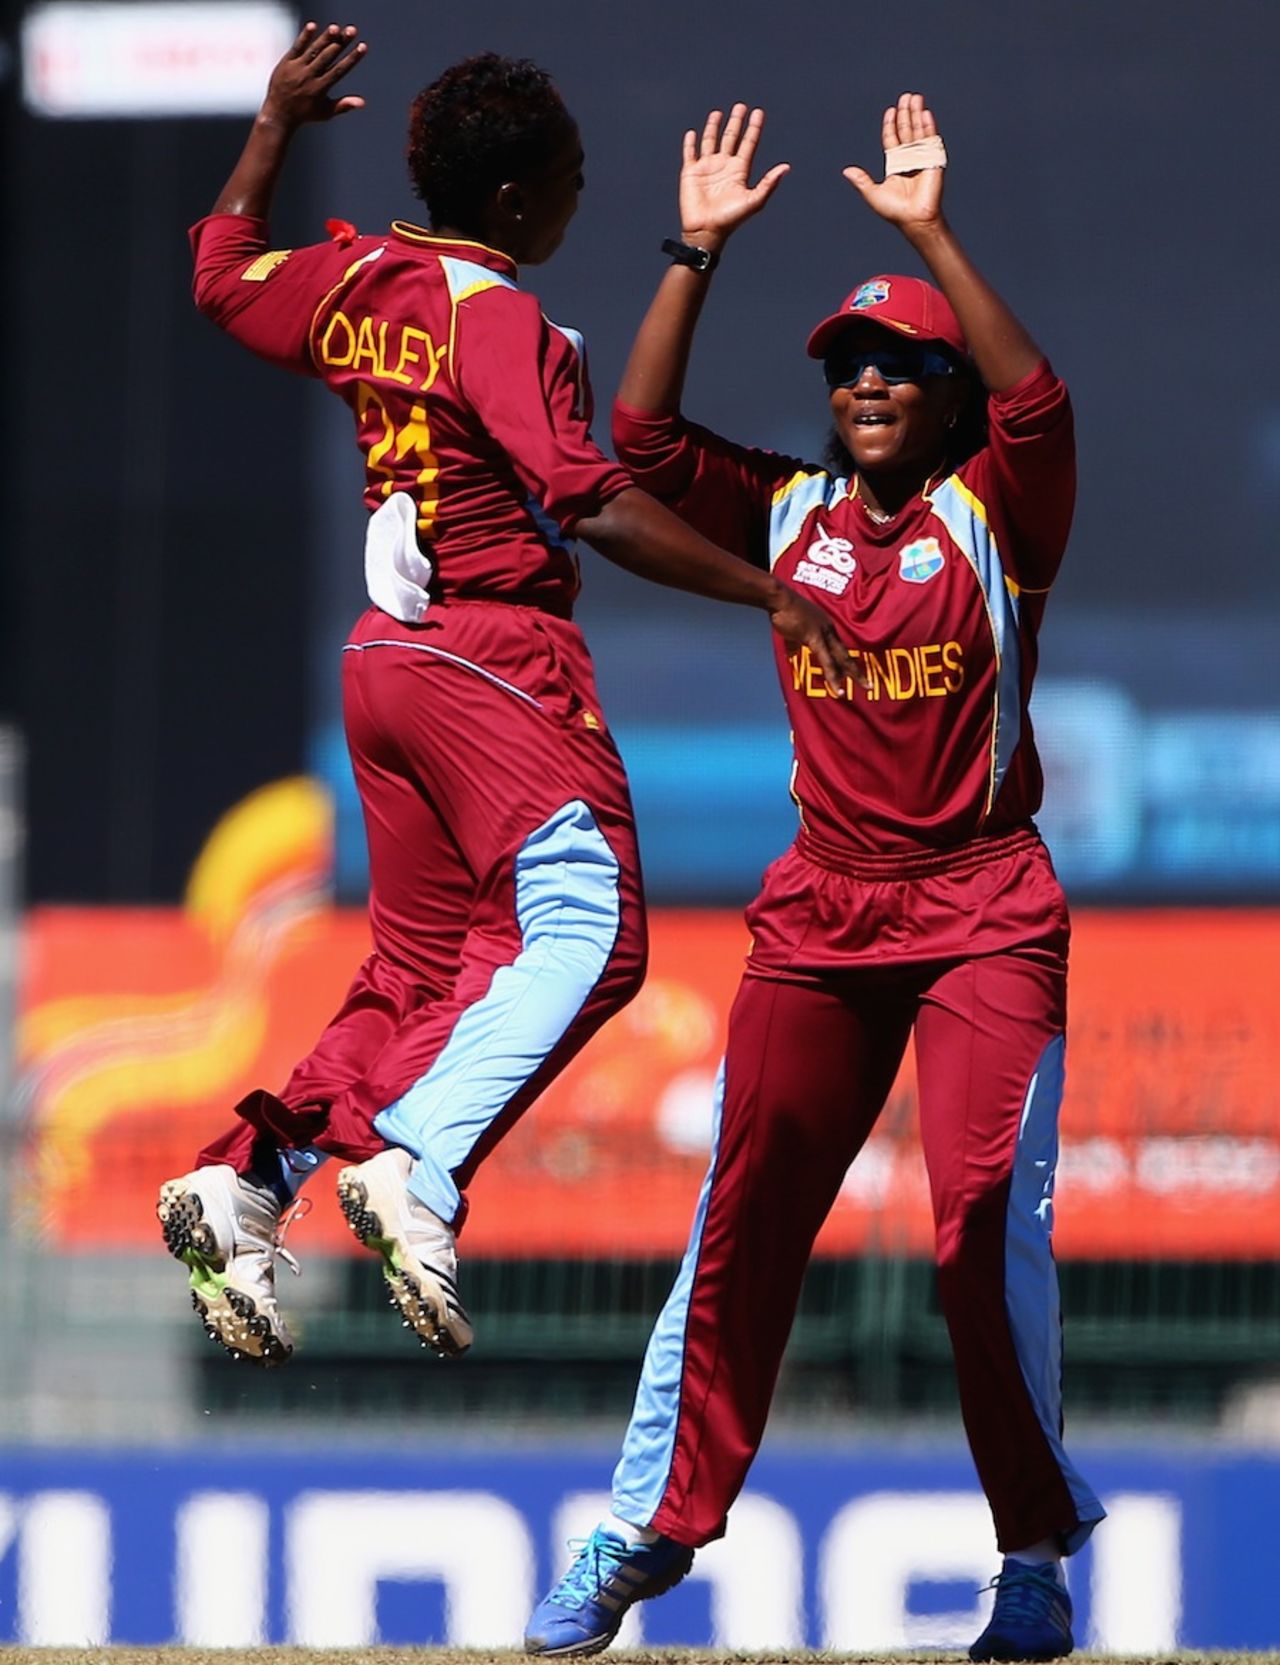 Shanel Daley jumps with joy after picking a wicket with her second ball, Australia v West Indies, 2nd semi-final, Women's World T20, Colombo, October 5, 2012